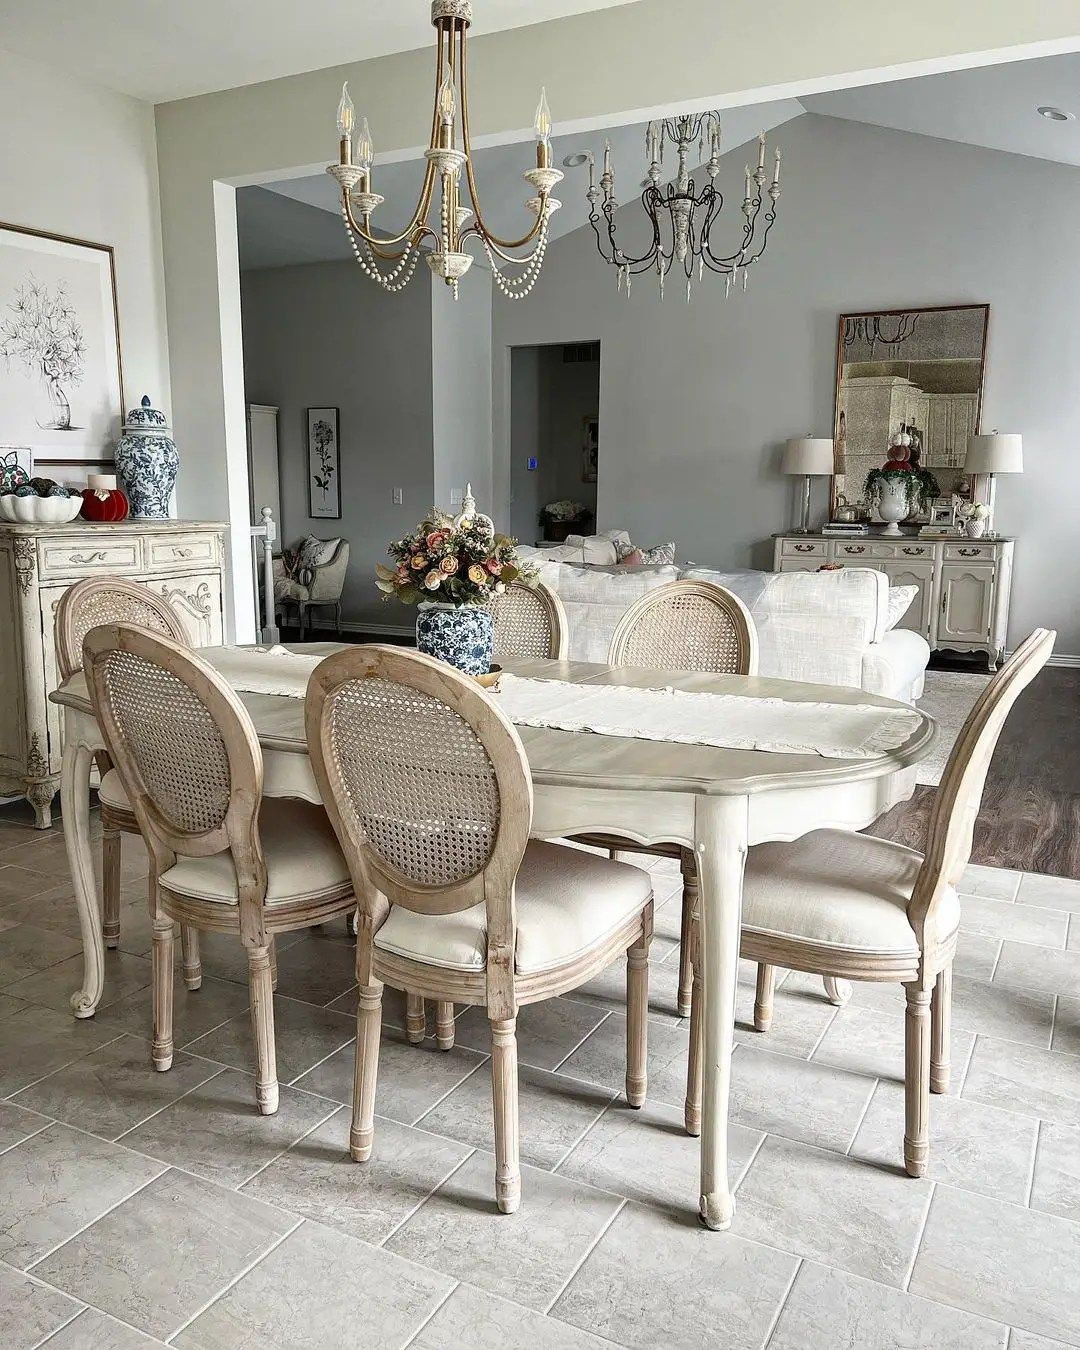 French Country Dining Room : Create the perfect French Country Dining Room aesthetic in 3 simple steps